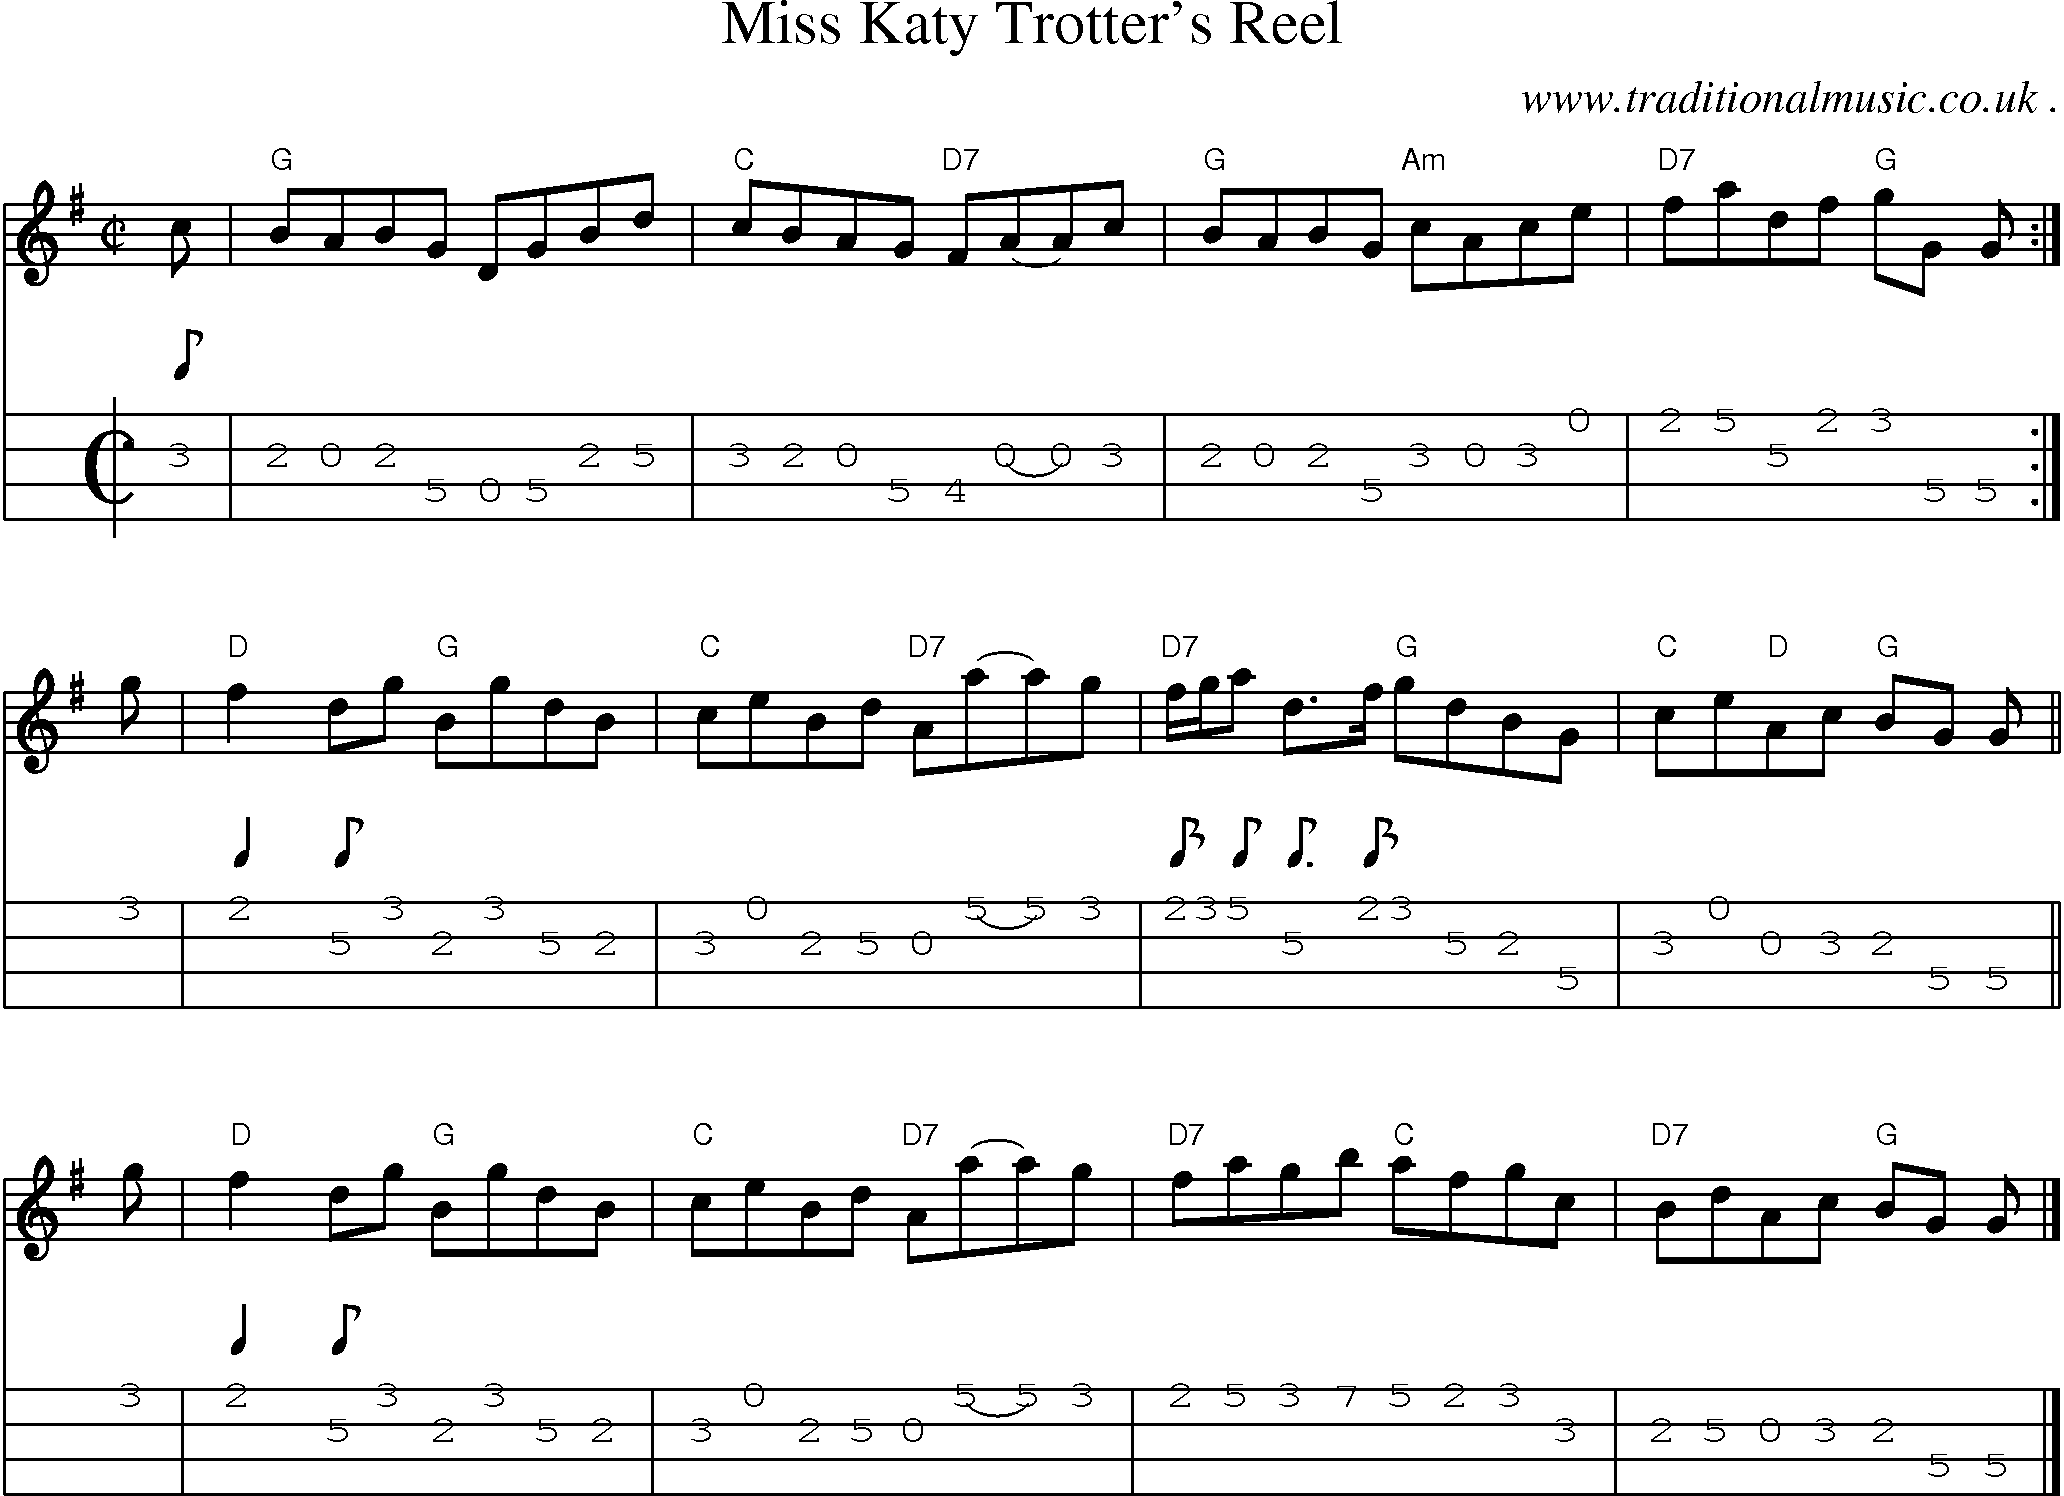 Sheet-music  score, Chords and Mandolin Tabs for Miss Katy Trotters Reel